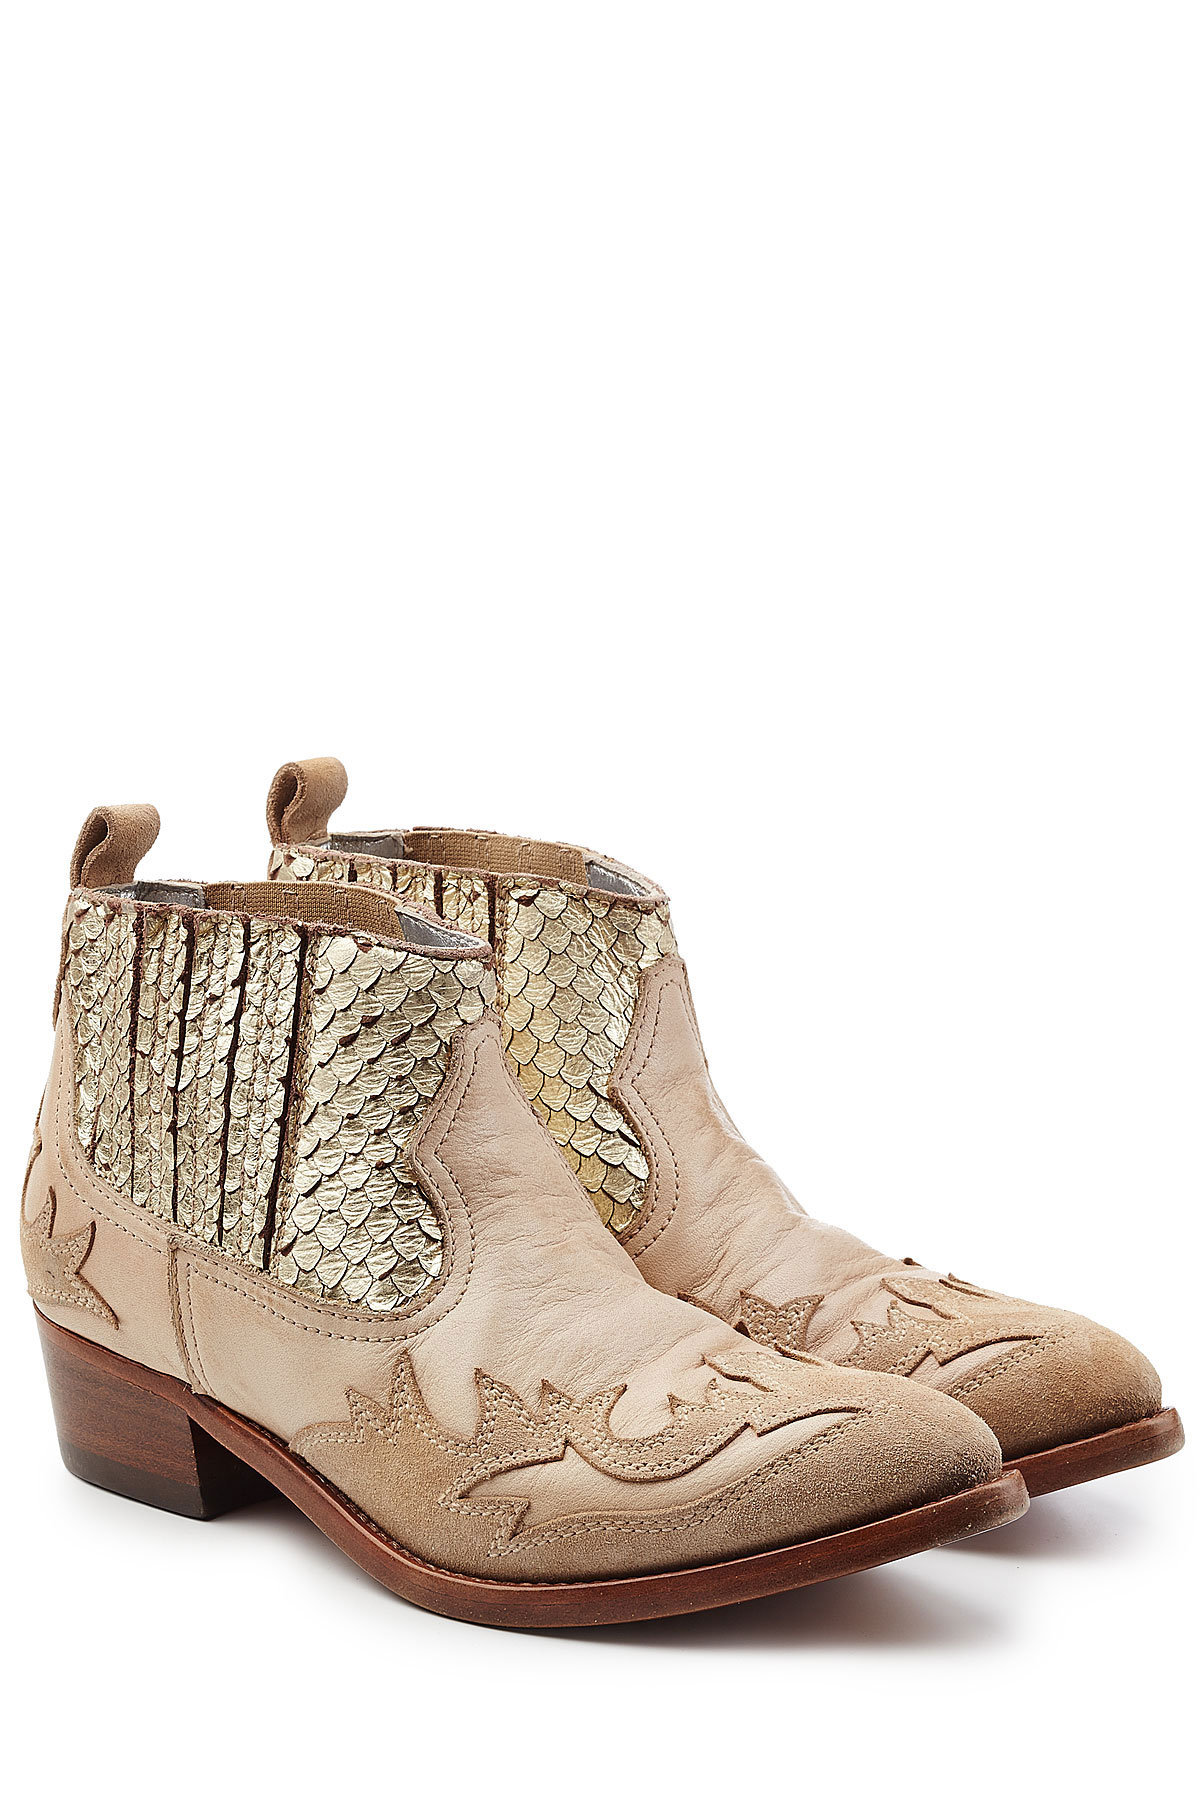 Victory Ankle Boots with Leather and Suede by Golden Goose Deluxe Brand